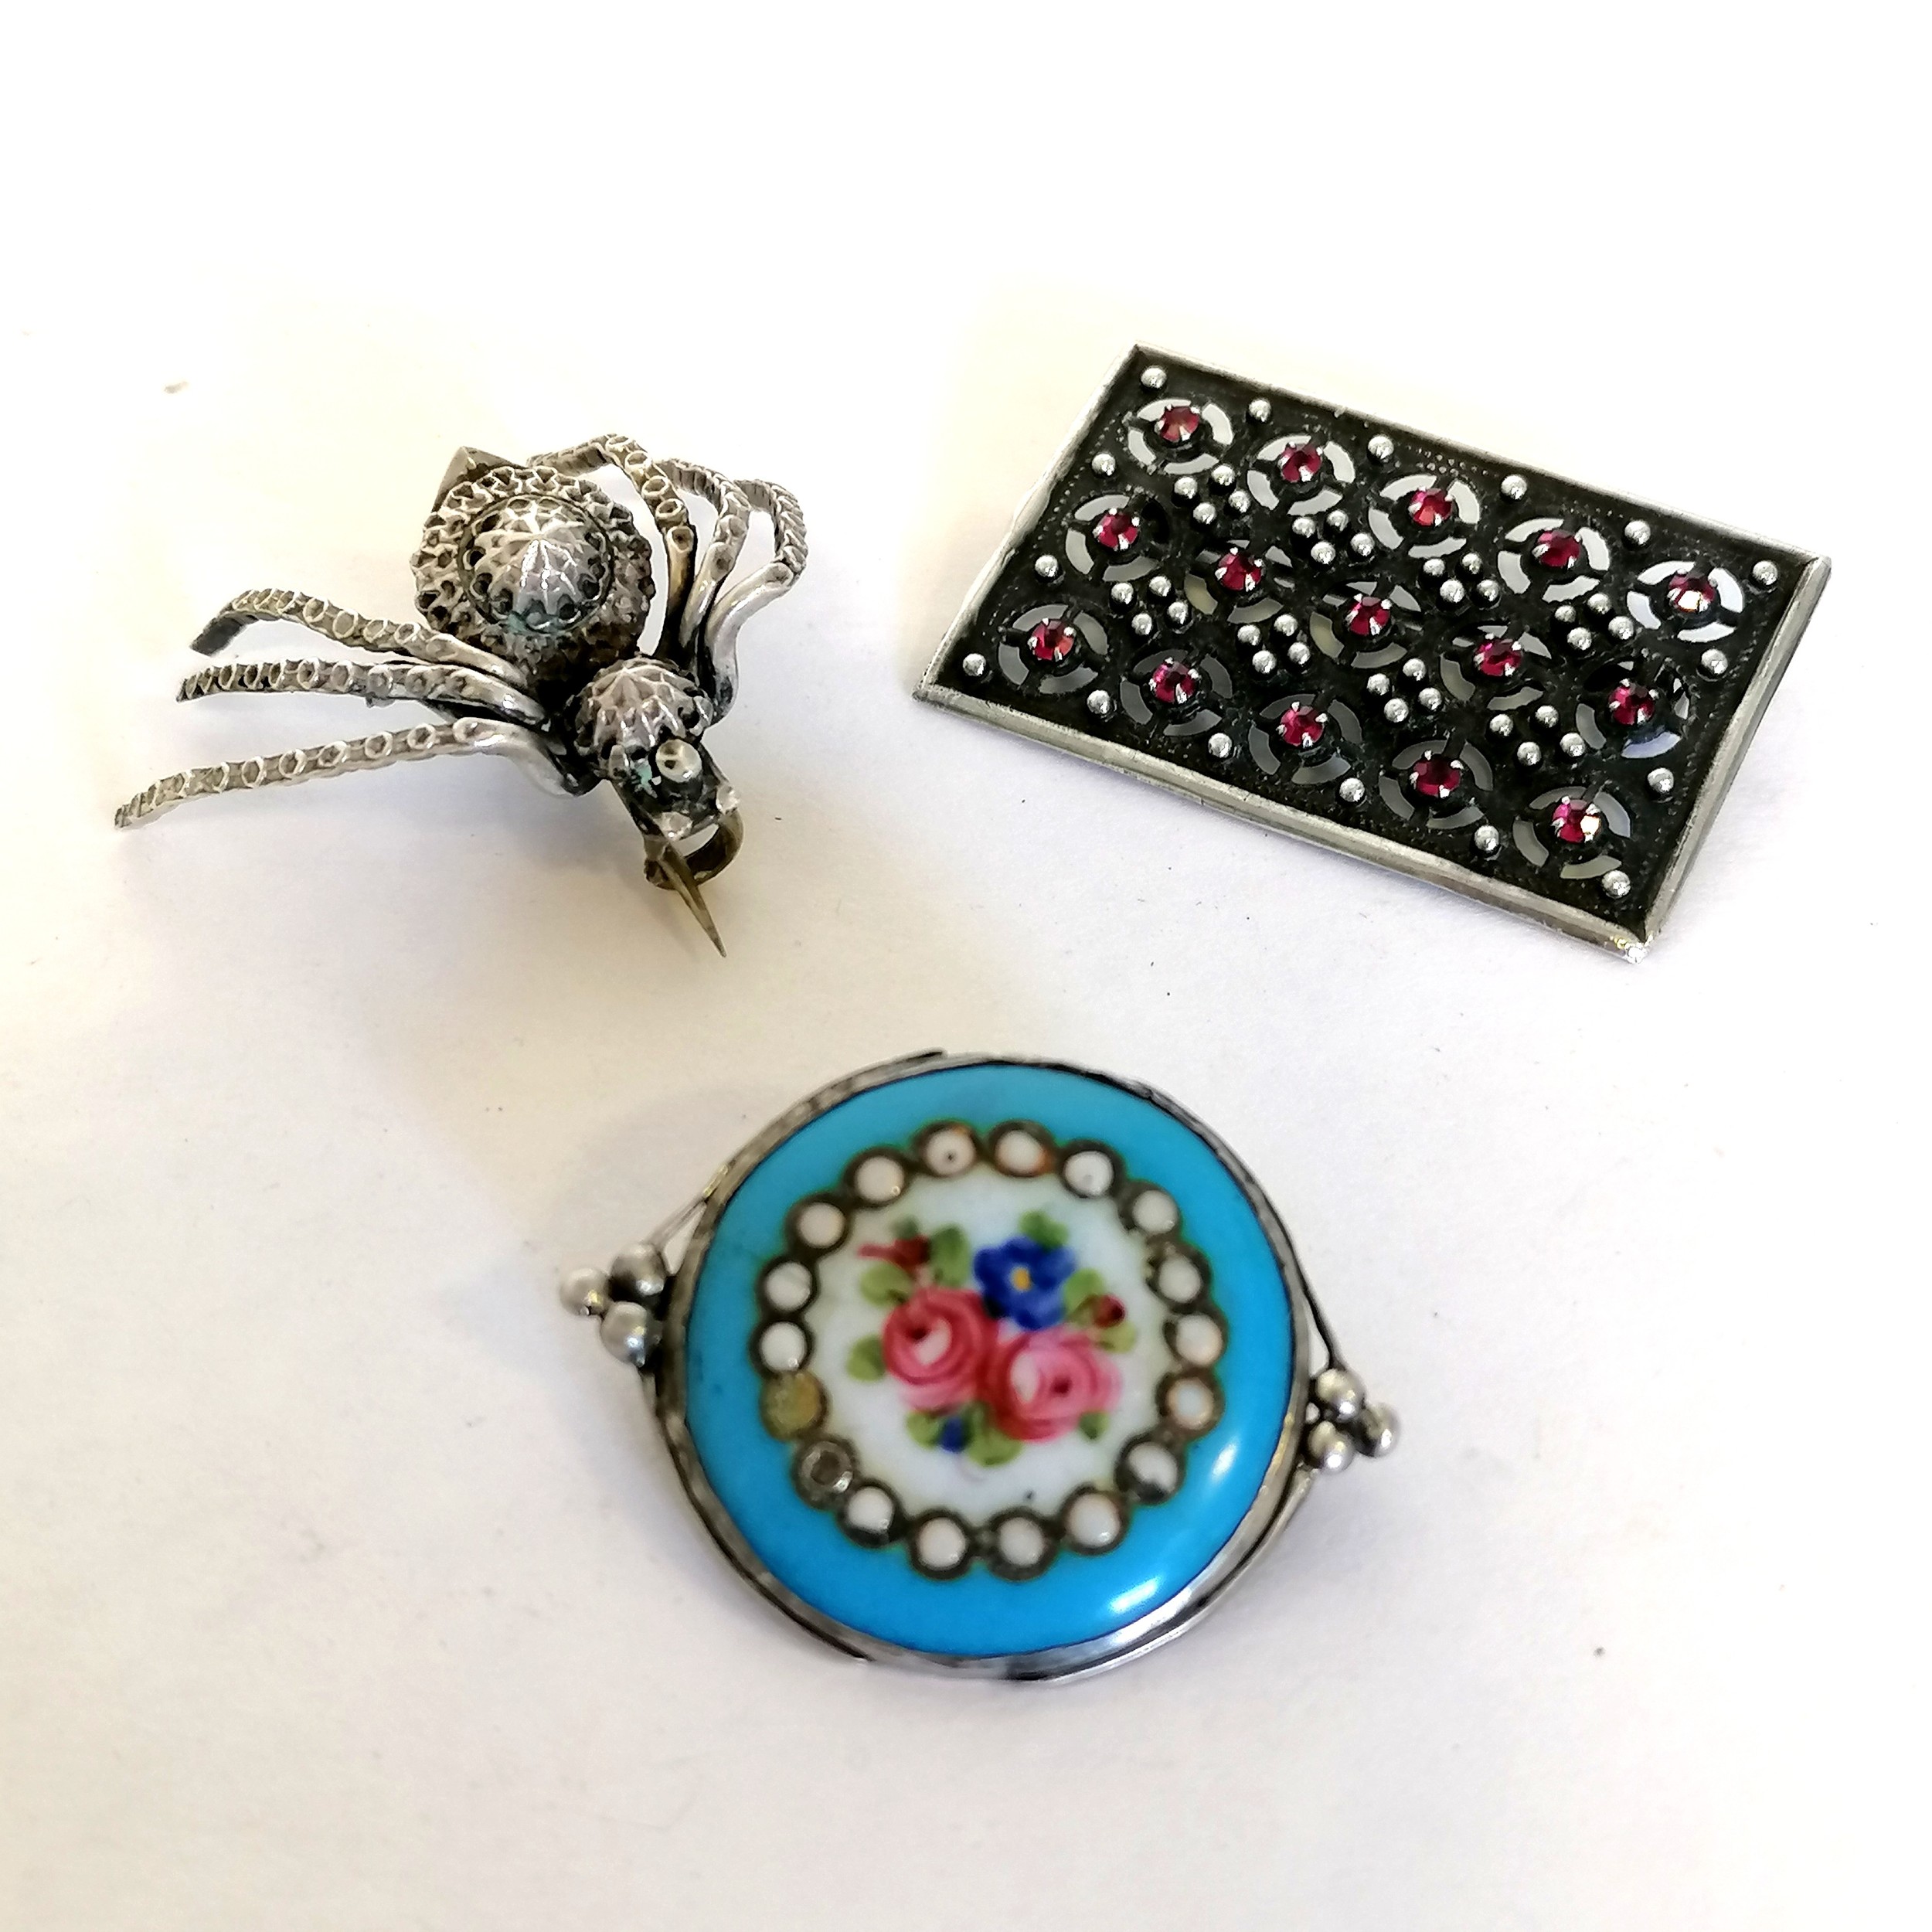 3 unmarked silver brooches, 1 with a floral enamel panel 3.5cm across - Image 3 of 3